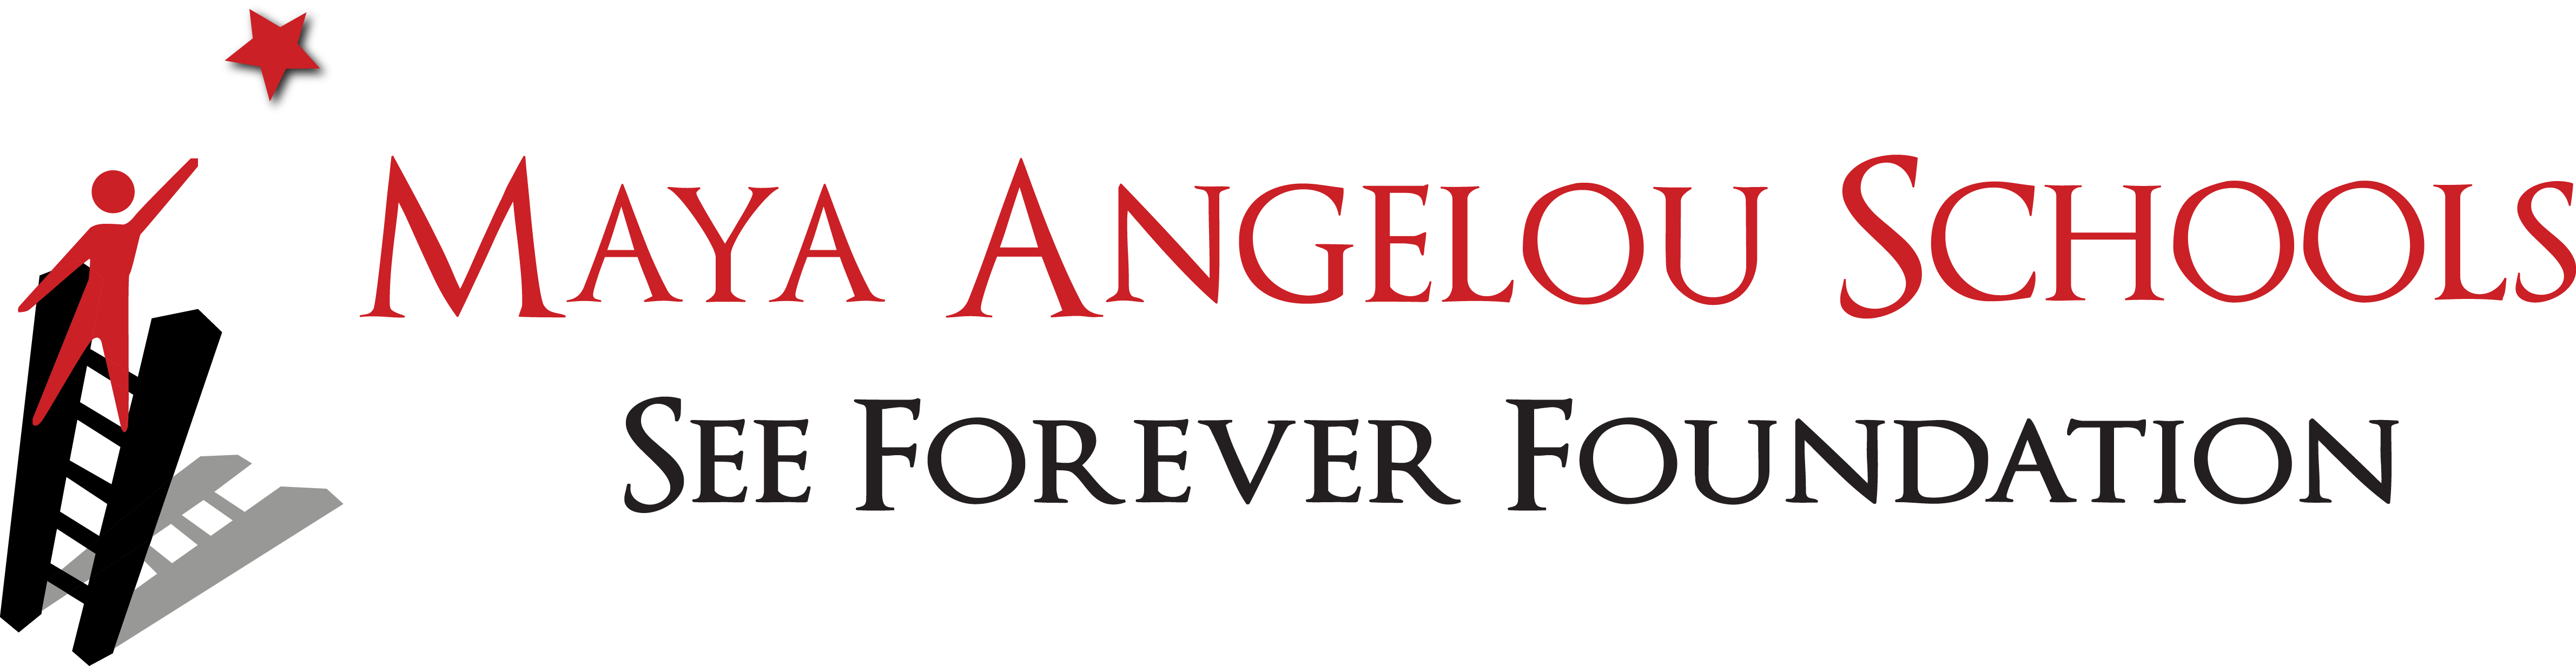 Maya Angelou Public Charter Schools - See Forever Foundation